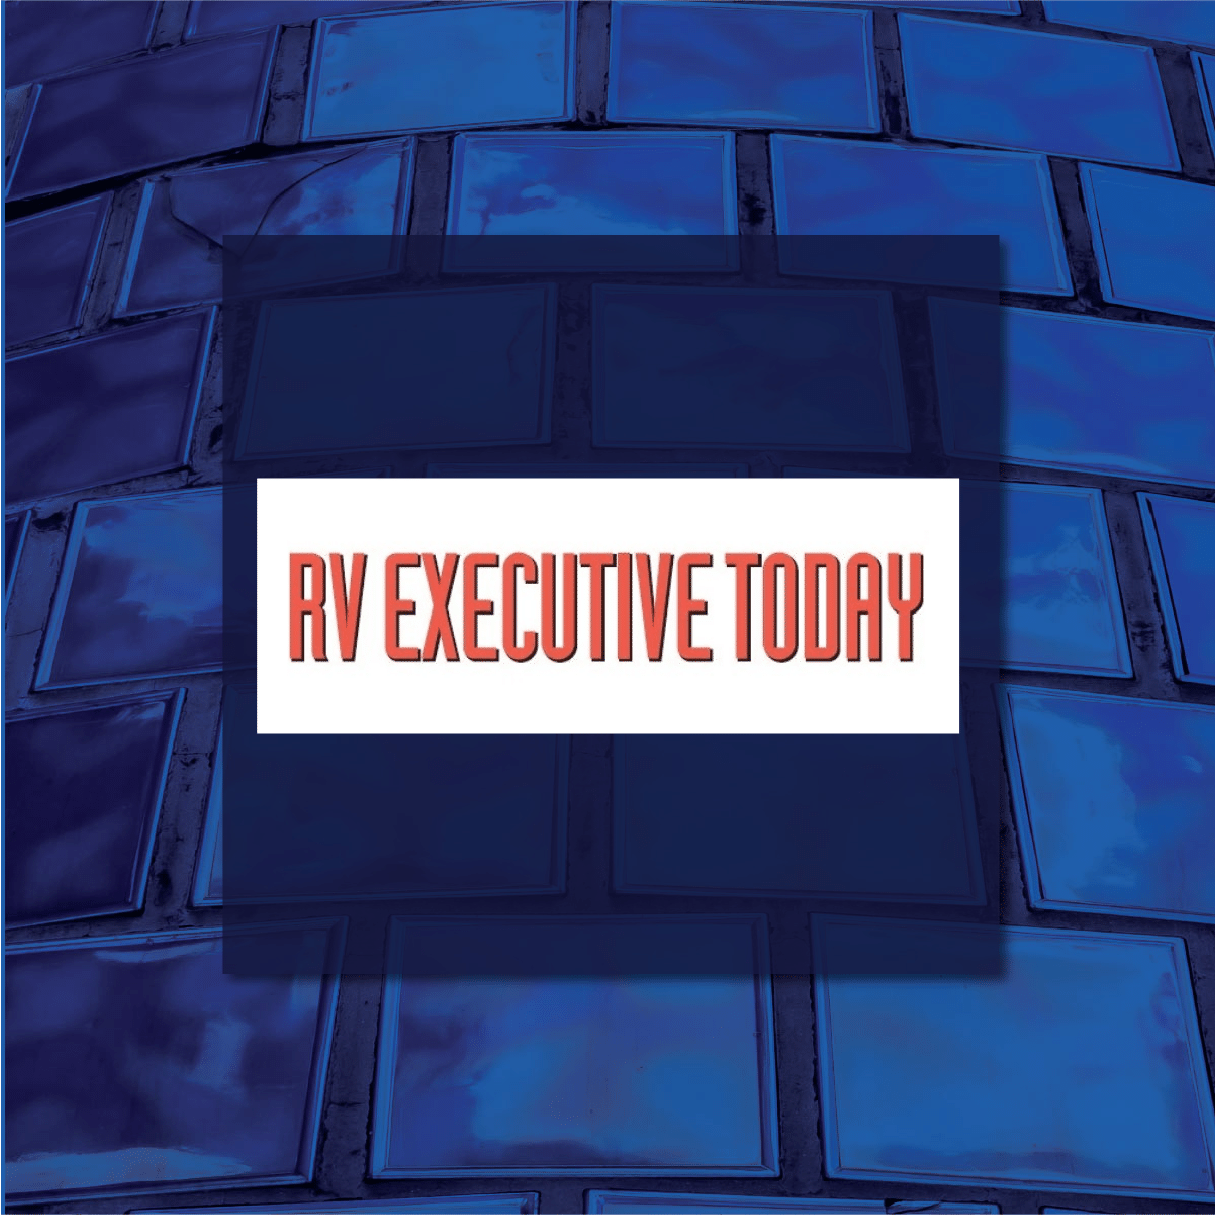 A KPA expert recently wrote an article in RV Executive Today